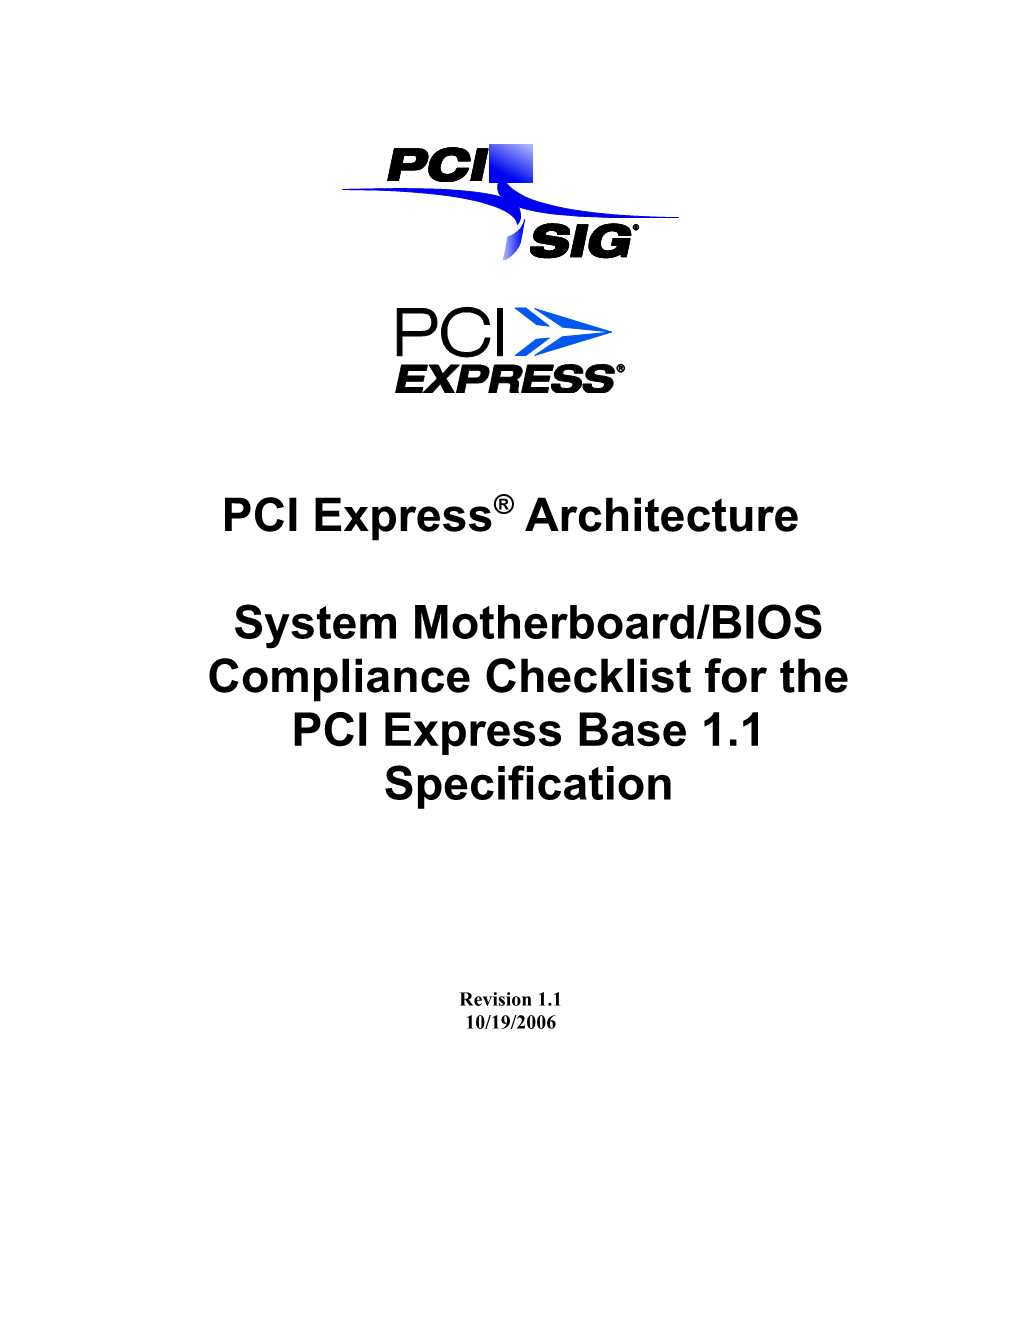 PCI Express Architecturesystem Motherboard/Bioscompliance Checklist for Thepci Express